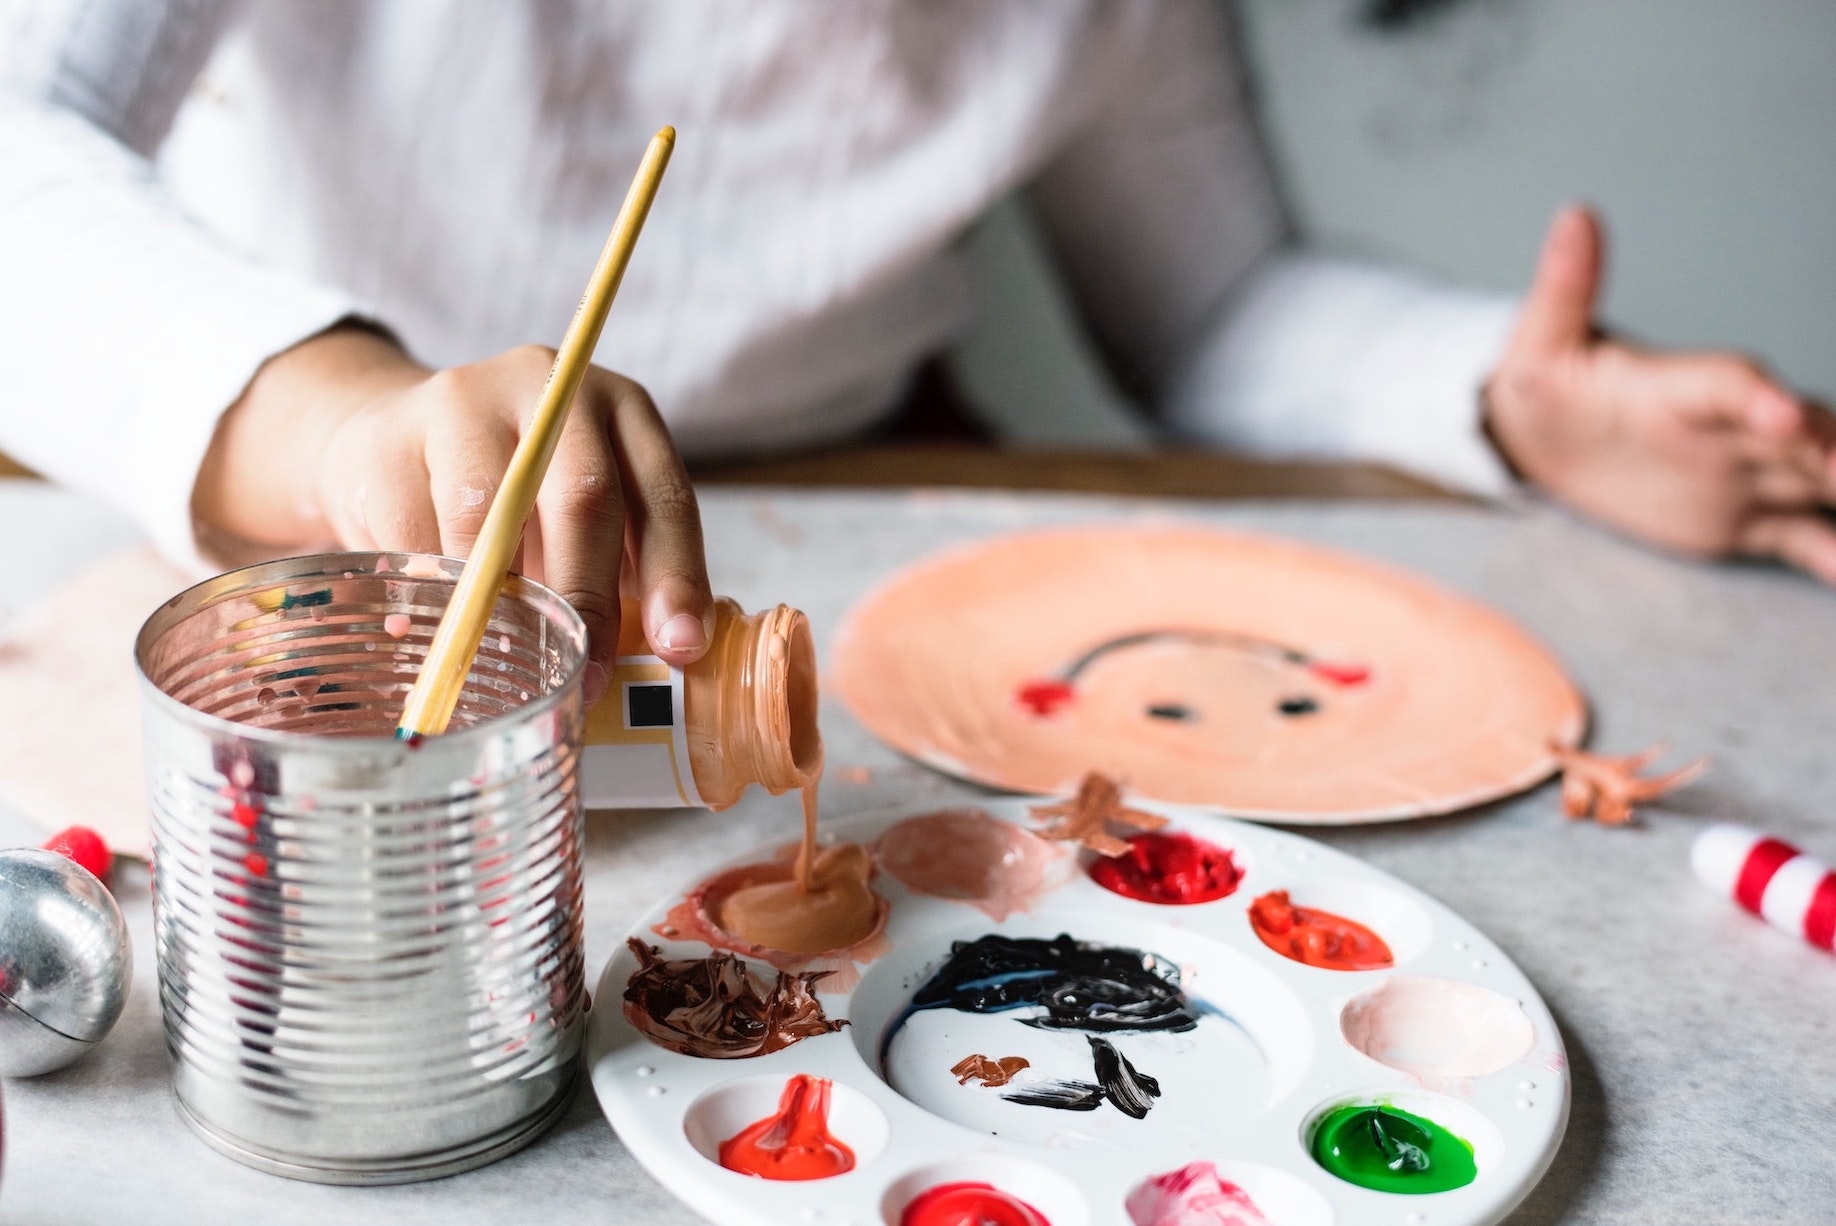 colouring and painting is a fun and creative activity for kids